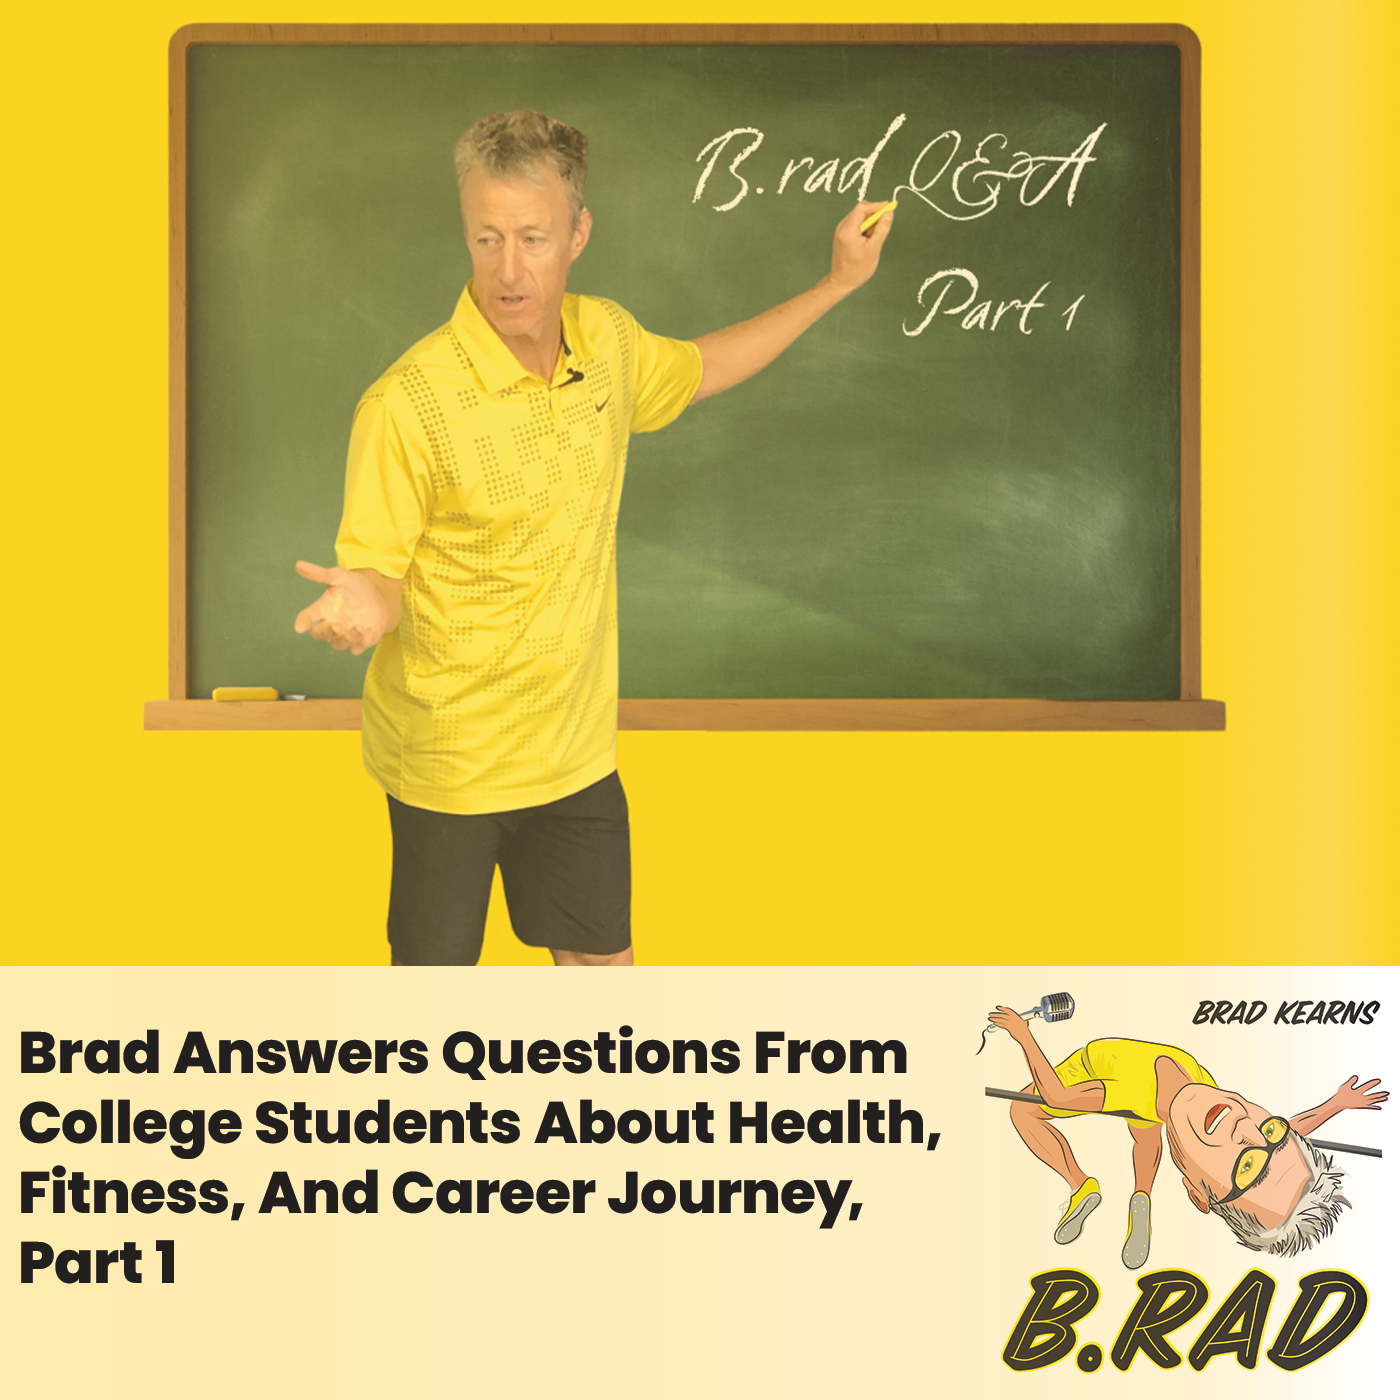 Brad Answers Questions From College Students About Health, Fitness, And Career Journey (Part 1)